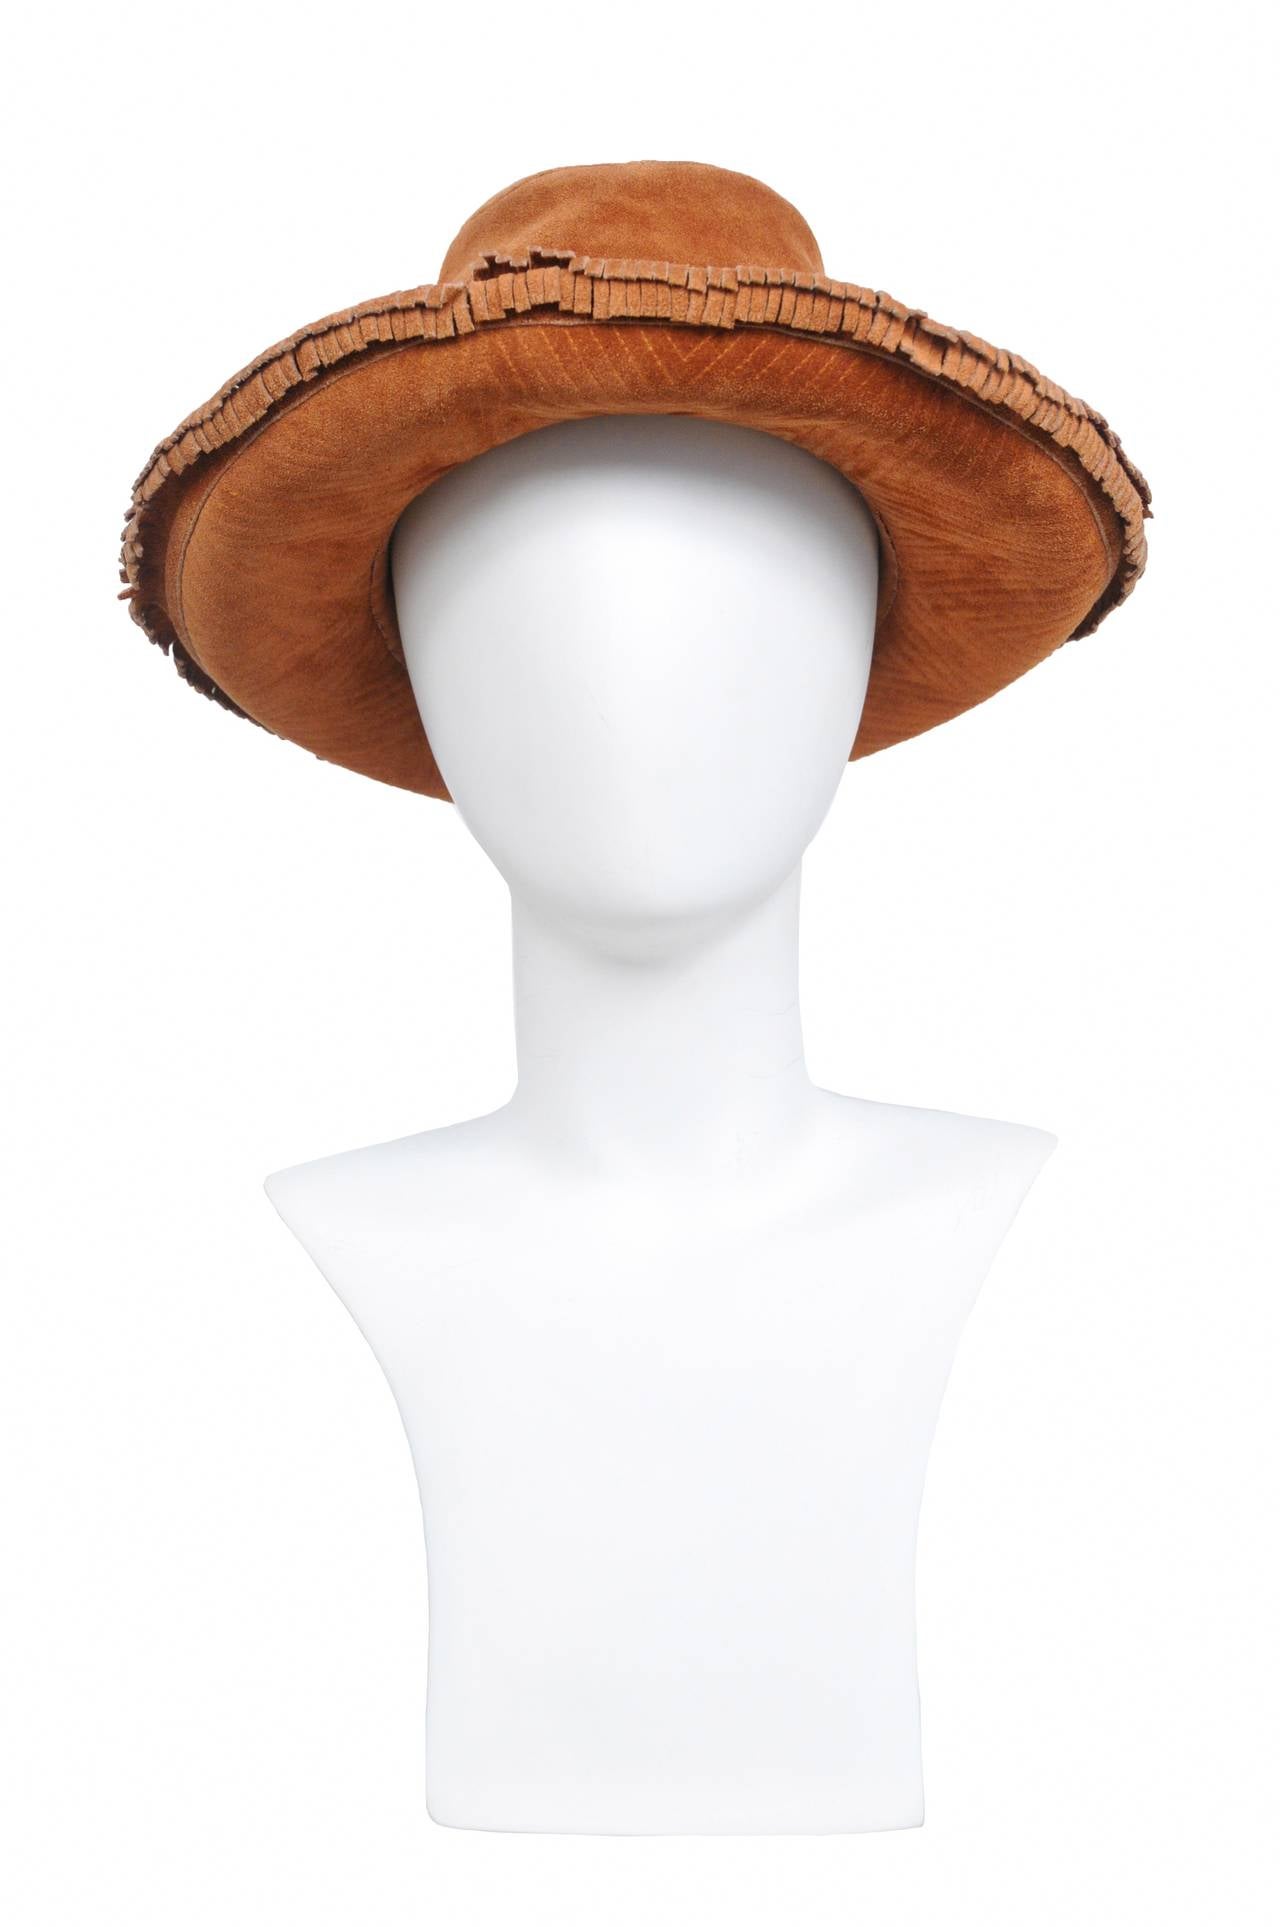 Vintage Yves Saint Laurent brown suede hat with raw fringe surrounding the brim and intricate stitch work on the underside of brim.